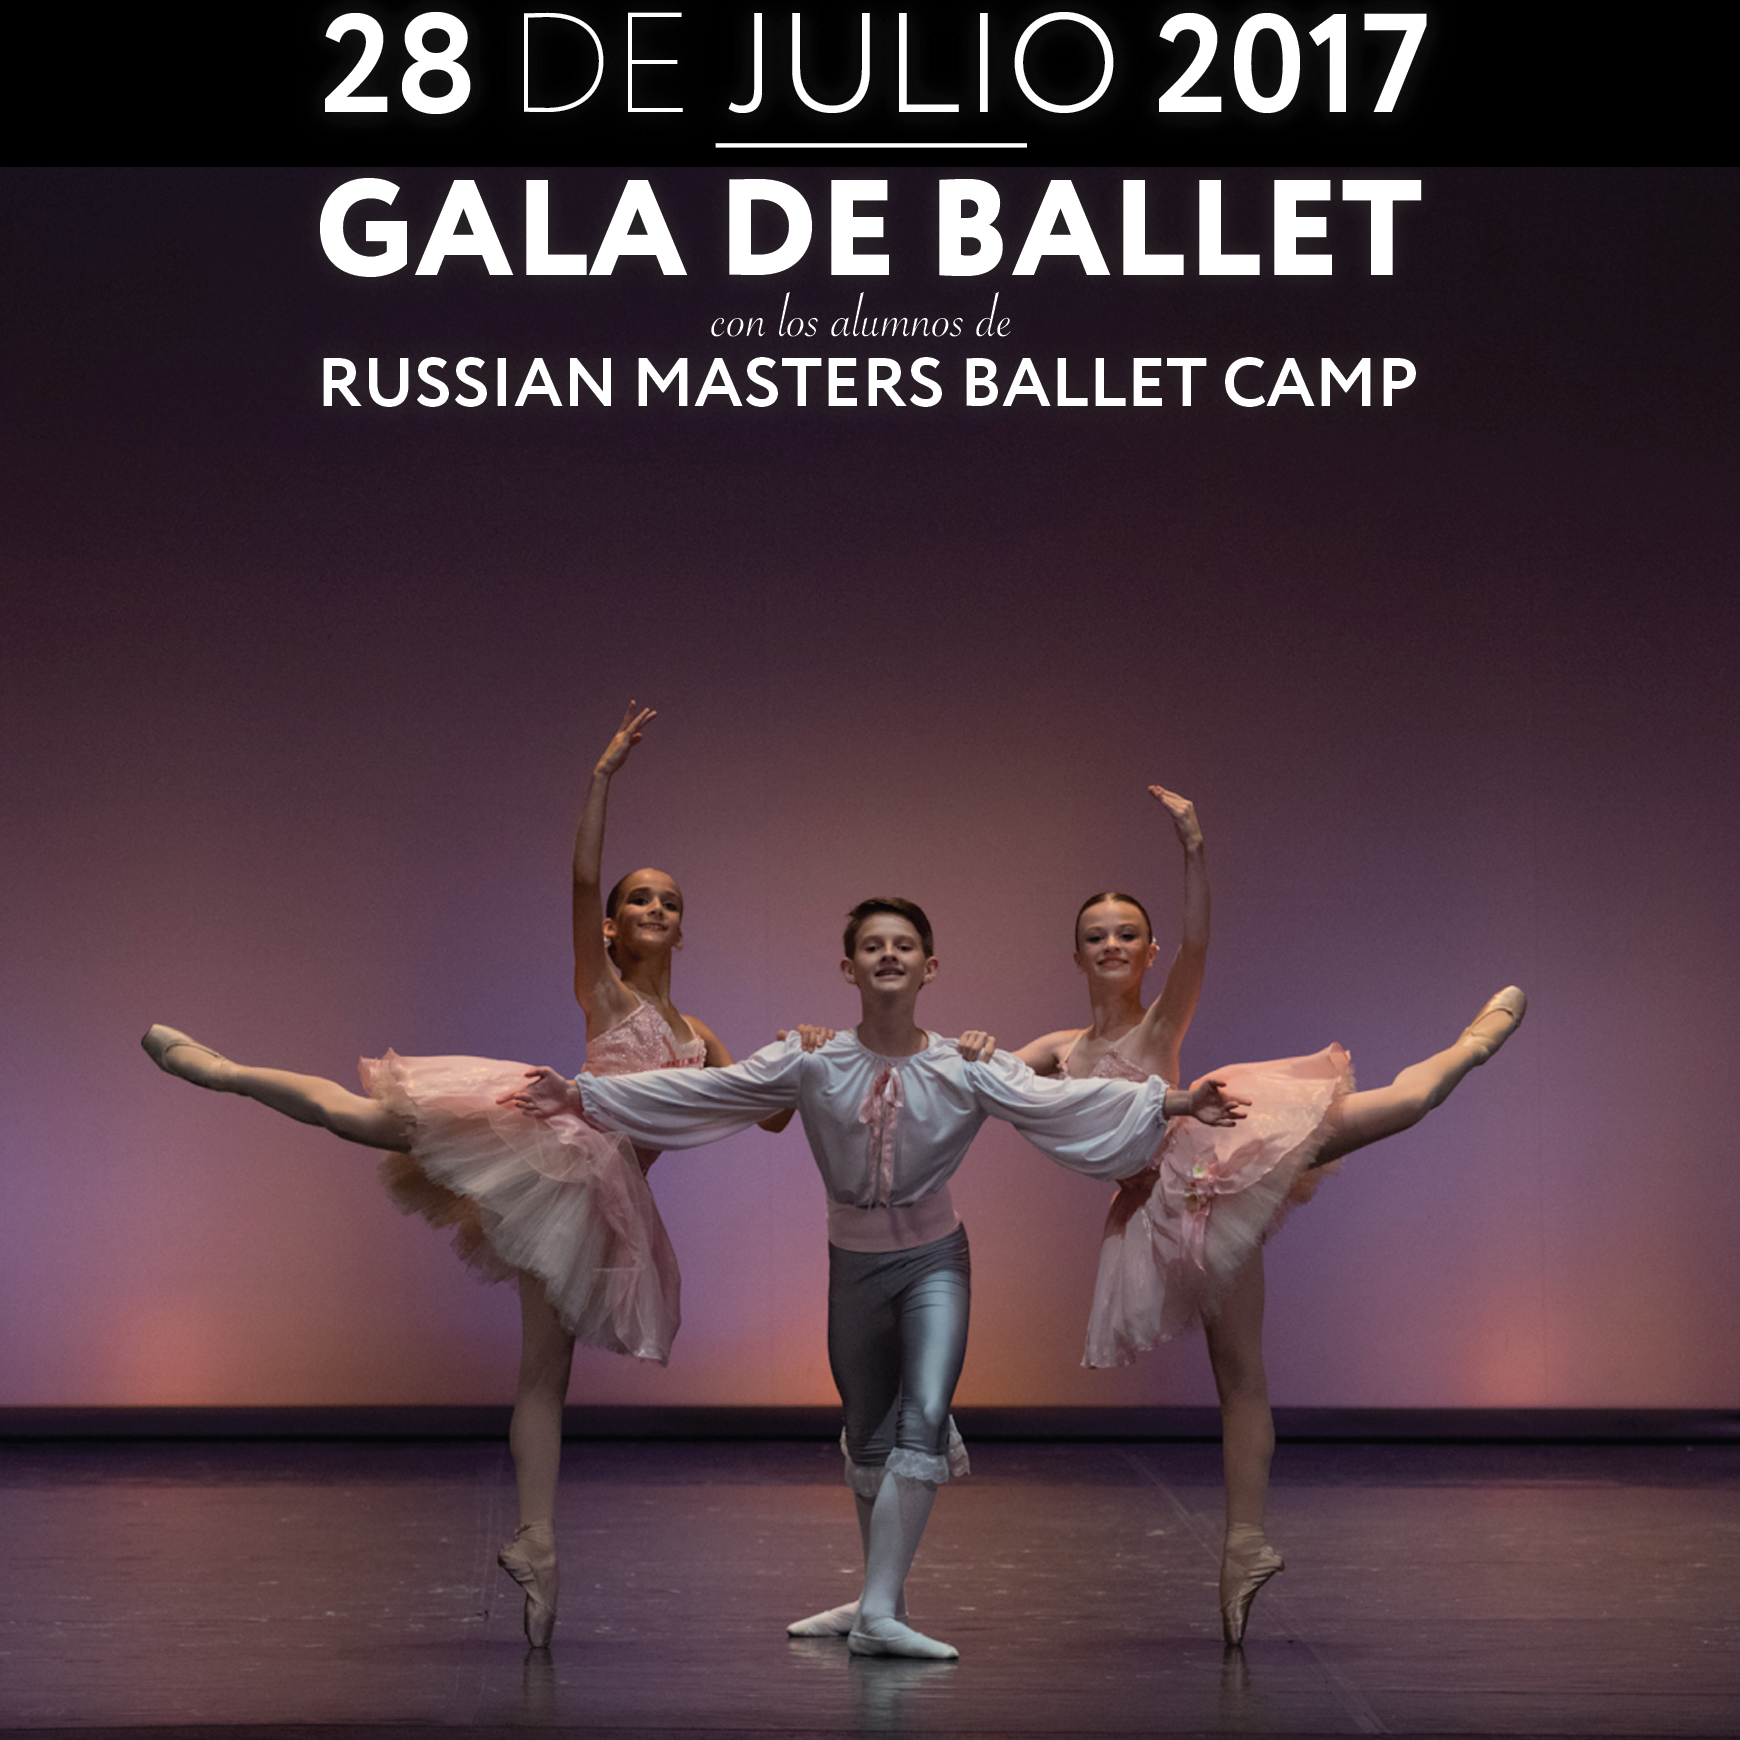 YOUNG STARS OF RUSSIAN MASTERS BALLET CAMP